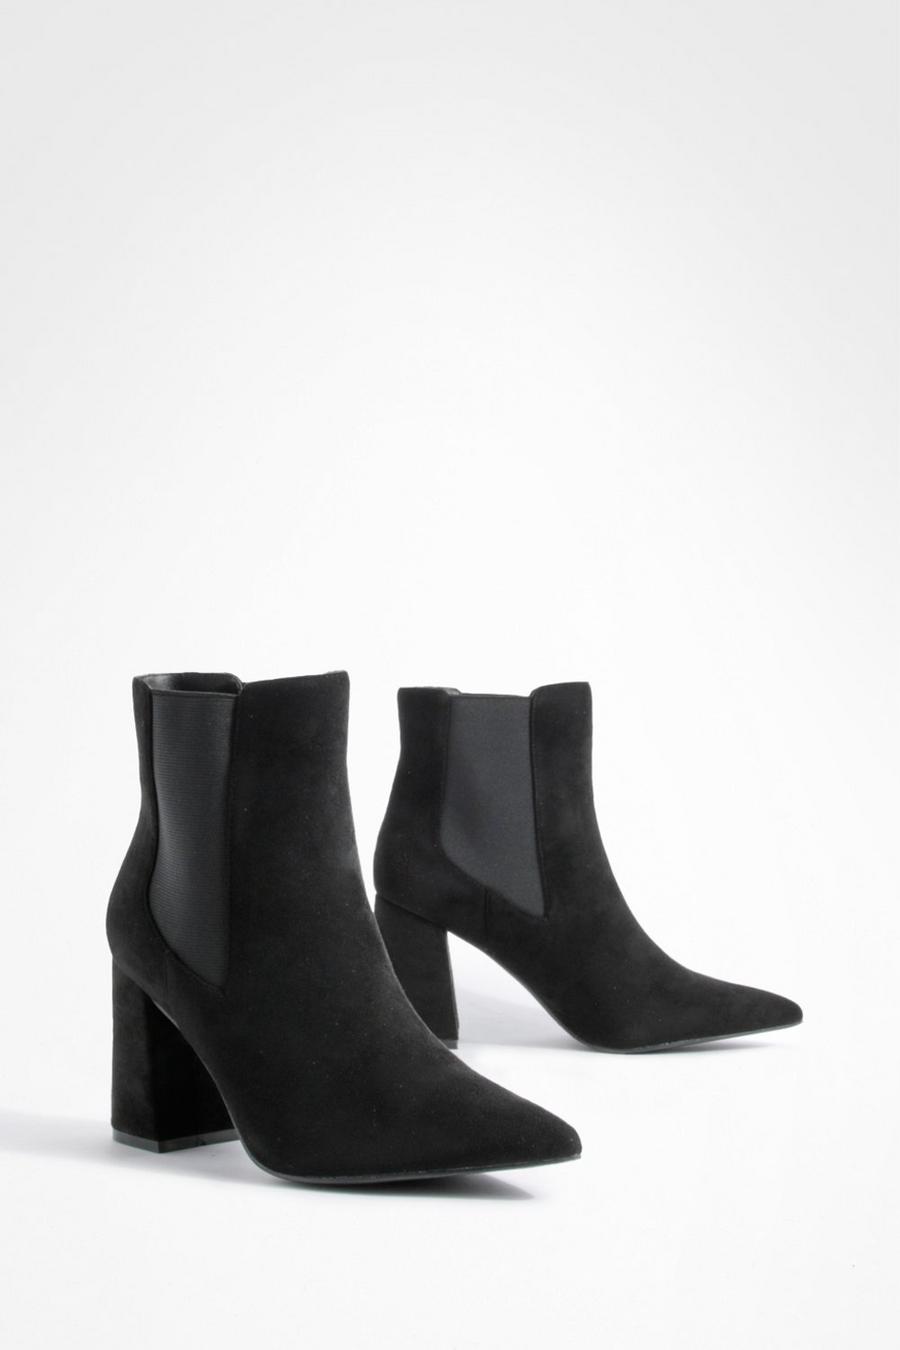 Black Faux Suede Block Heel Pointed Toe Ankle Boots